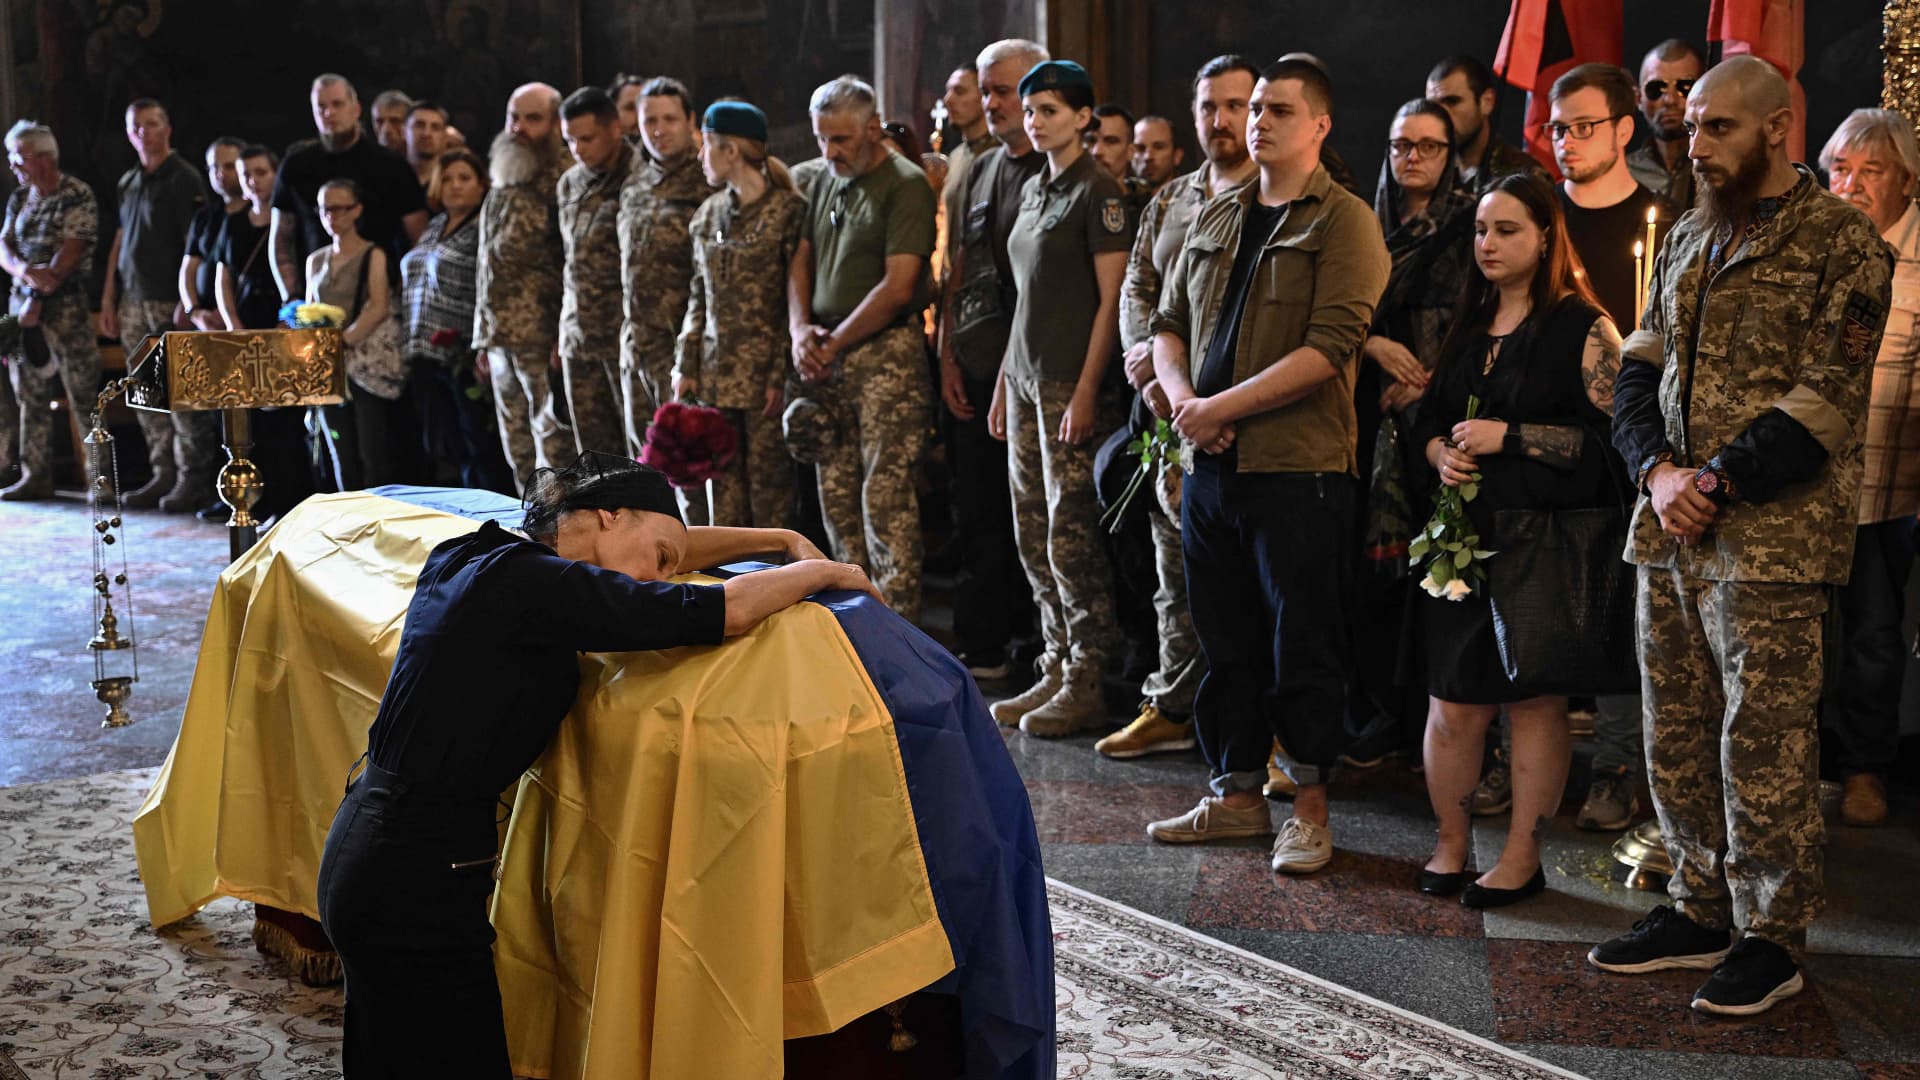 Nadiya, the mother of late Ukrainian serviceman Roman Barvinok, mourns at his coffin during a funeral service in St. Michael's Golden-Domed Cathedral in Kyiv on Aug. 28, 2022, amid the Russian invasion of Ukraine.